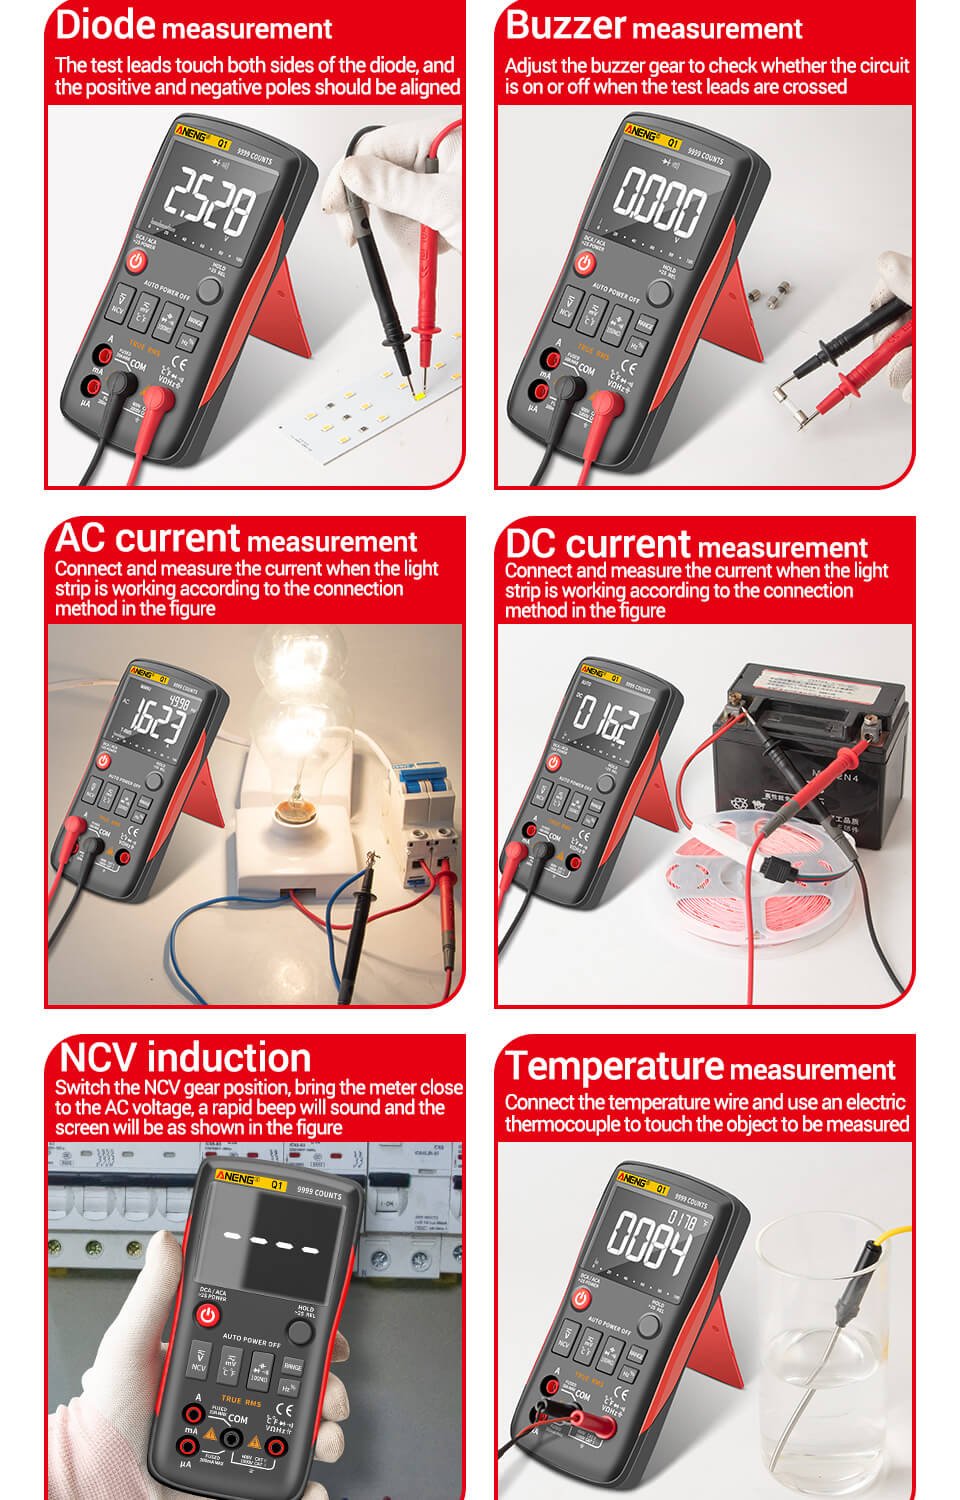 NO BOX - Digital Multimeter - Auto Ranging - Measure Voltage you are being exposed to in the home or outside. - GroundedKiwi.nzsensor sensorbody voltagedetectorearth test